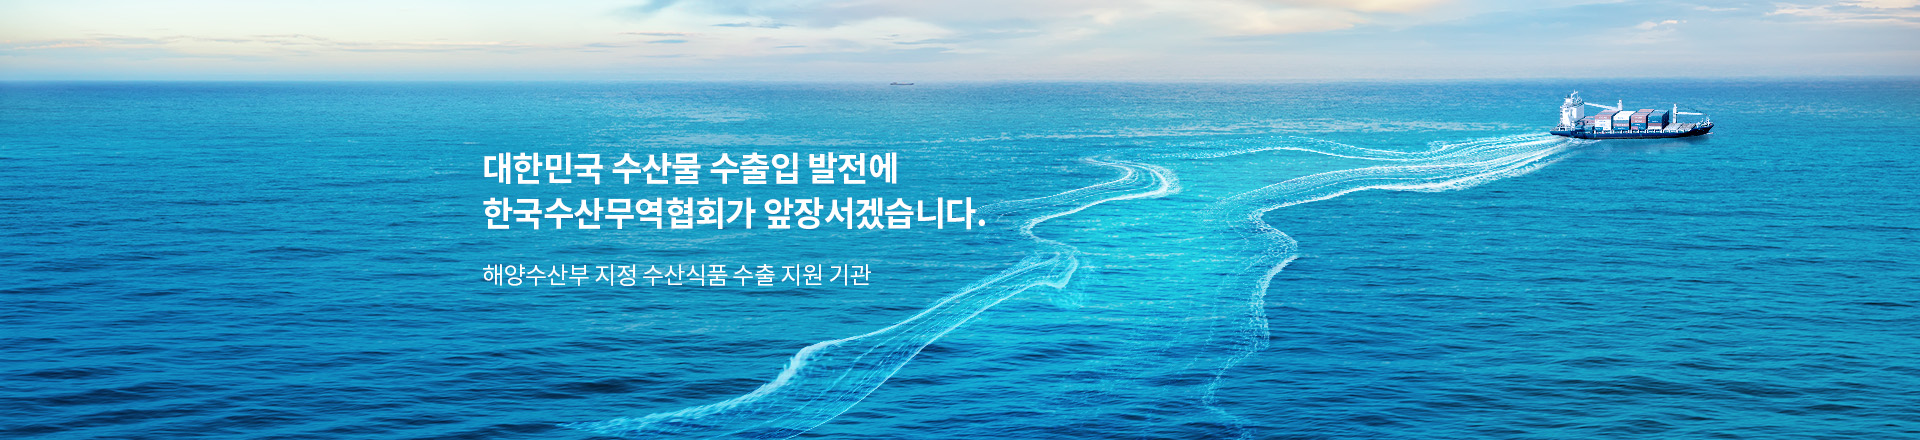 The Supporter for Korea fishery trade